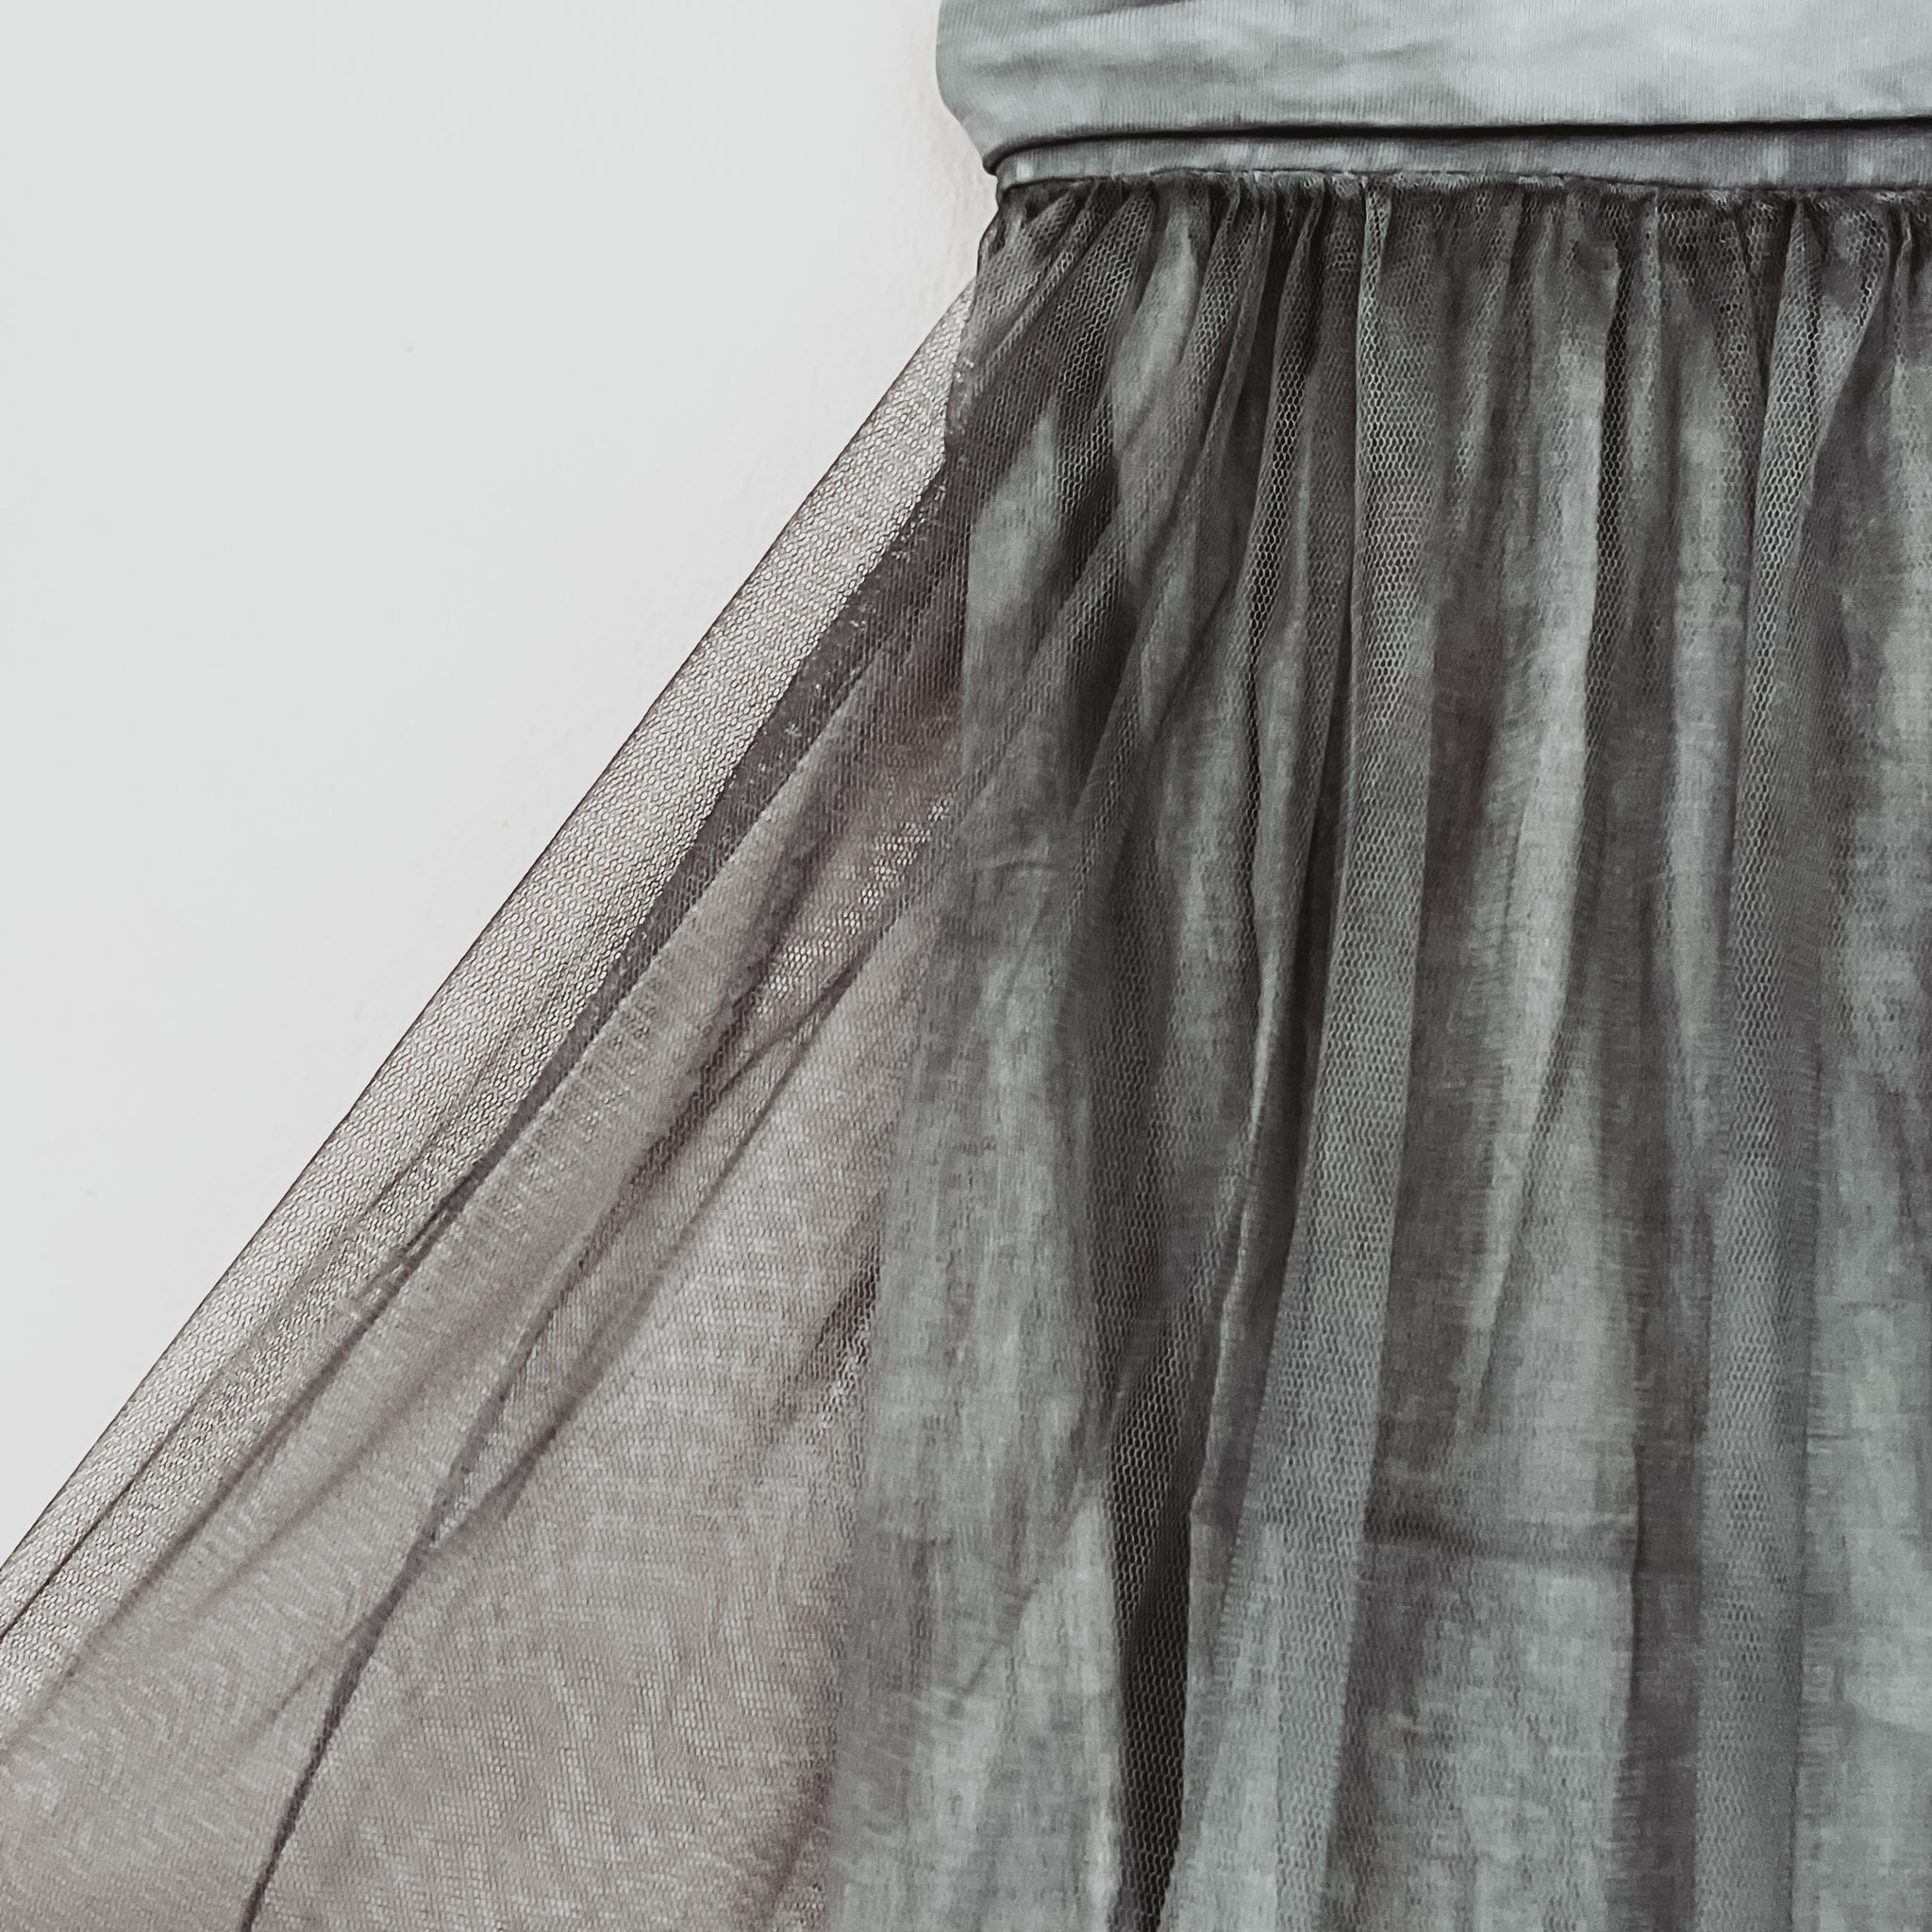 Paris TULLE skirt - charcoal grey – Lucy Dodwell